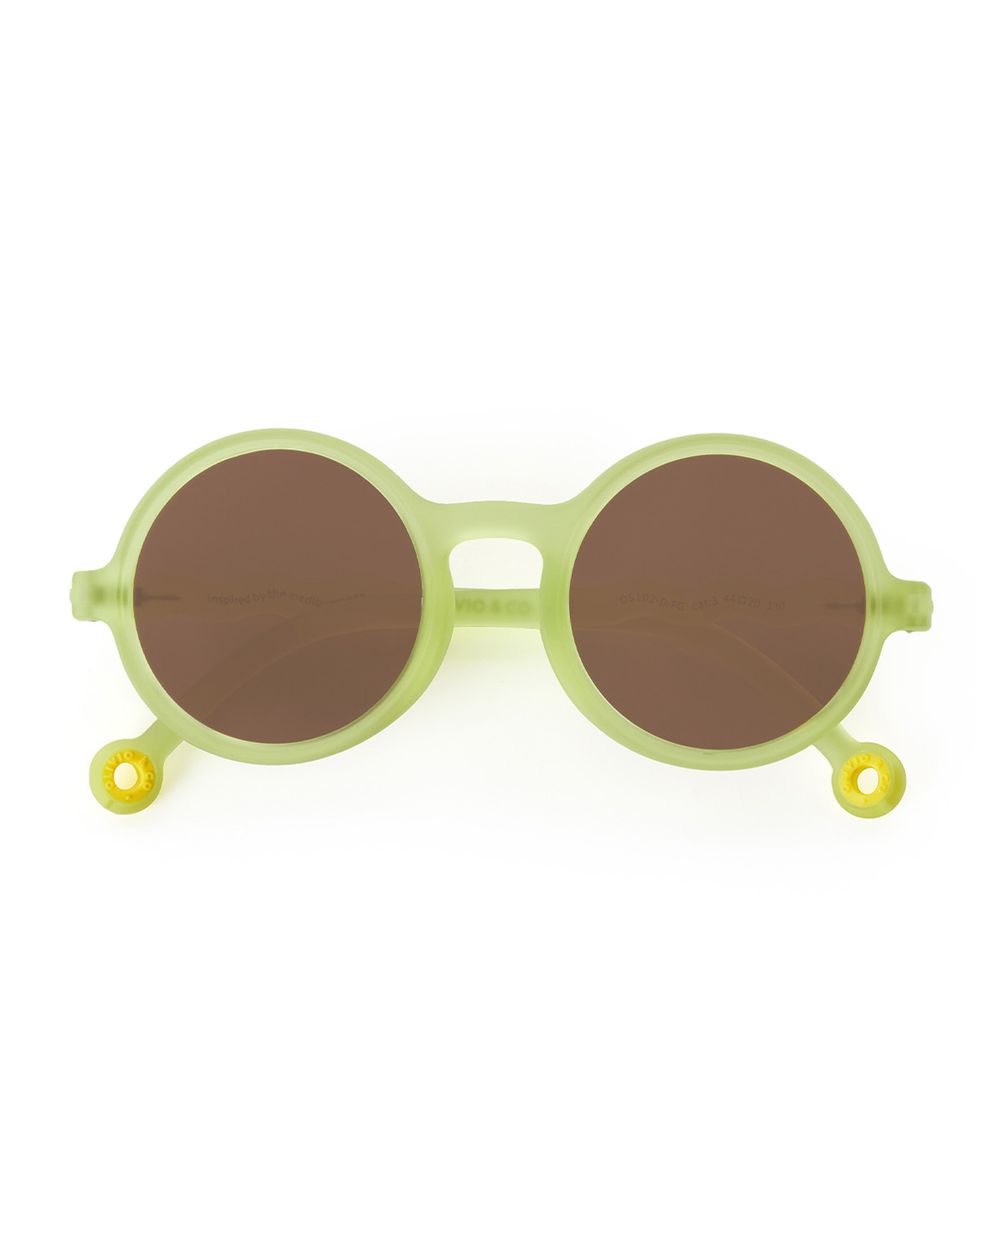 Kids Round Sunglasses Lime Green